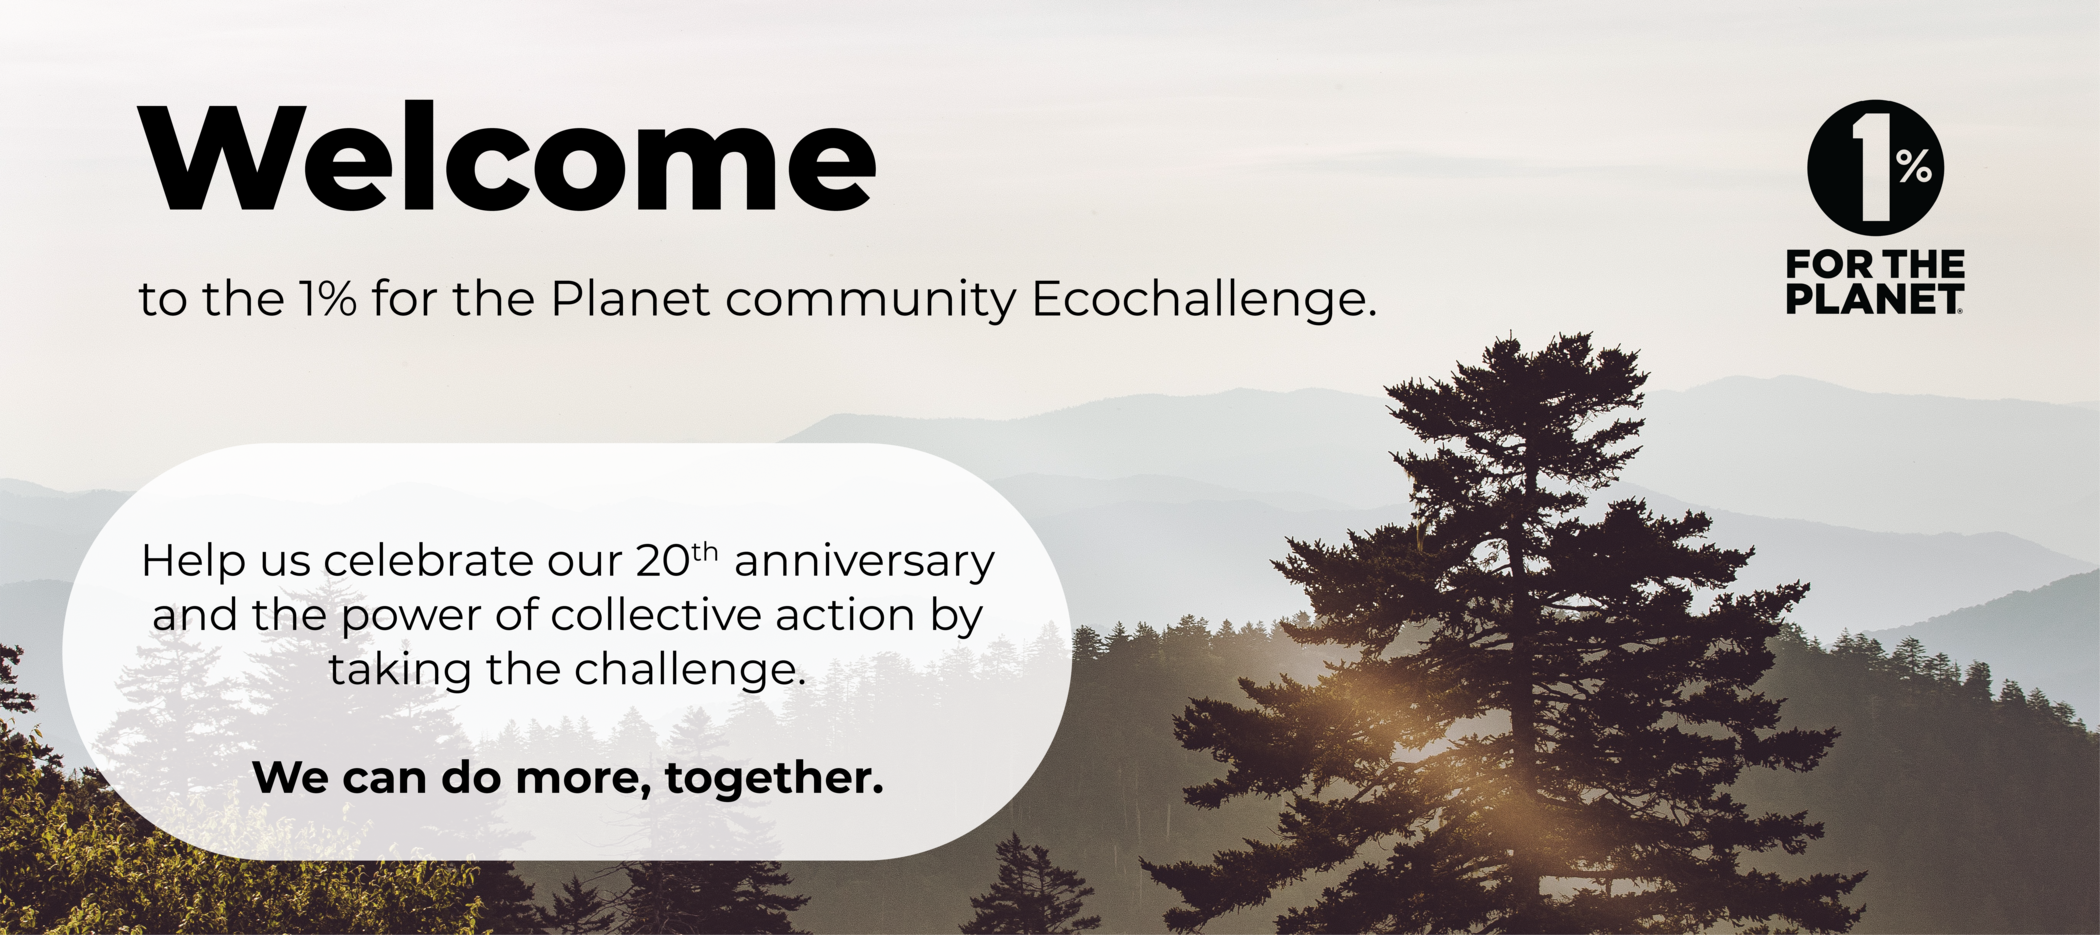 1% for the Planet welcome banner with text - Help us celebrate our 20th Anniversary and the power of collective action by taking the challenge. We can do more, together.